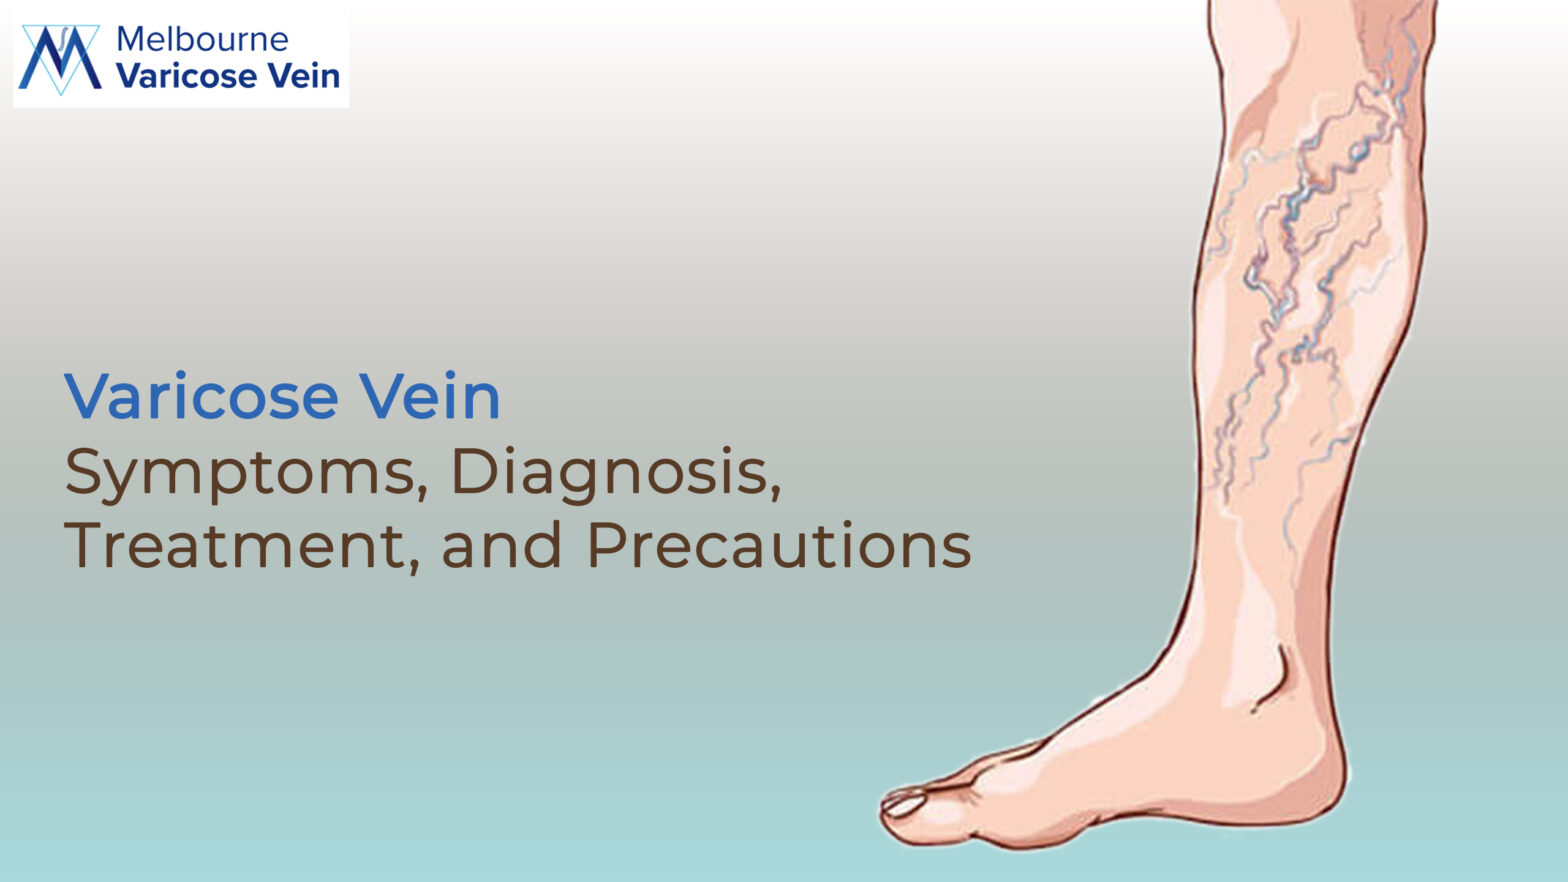 Varicose Veins: Symptoms, Diagnosis, Treatment, and Precautions - Best Vein Varicose Clinic in Victoria Melbourne